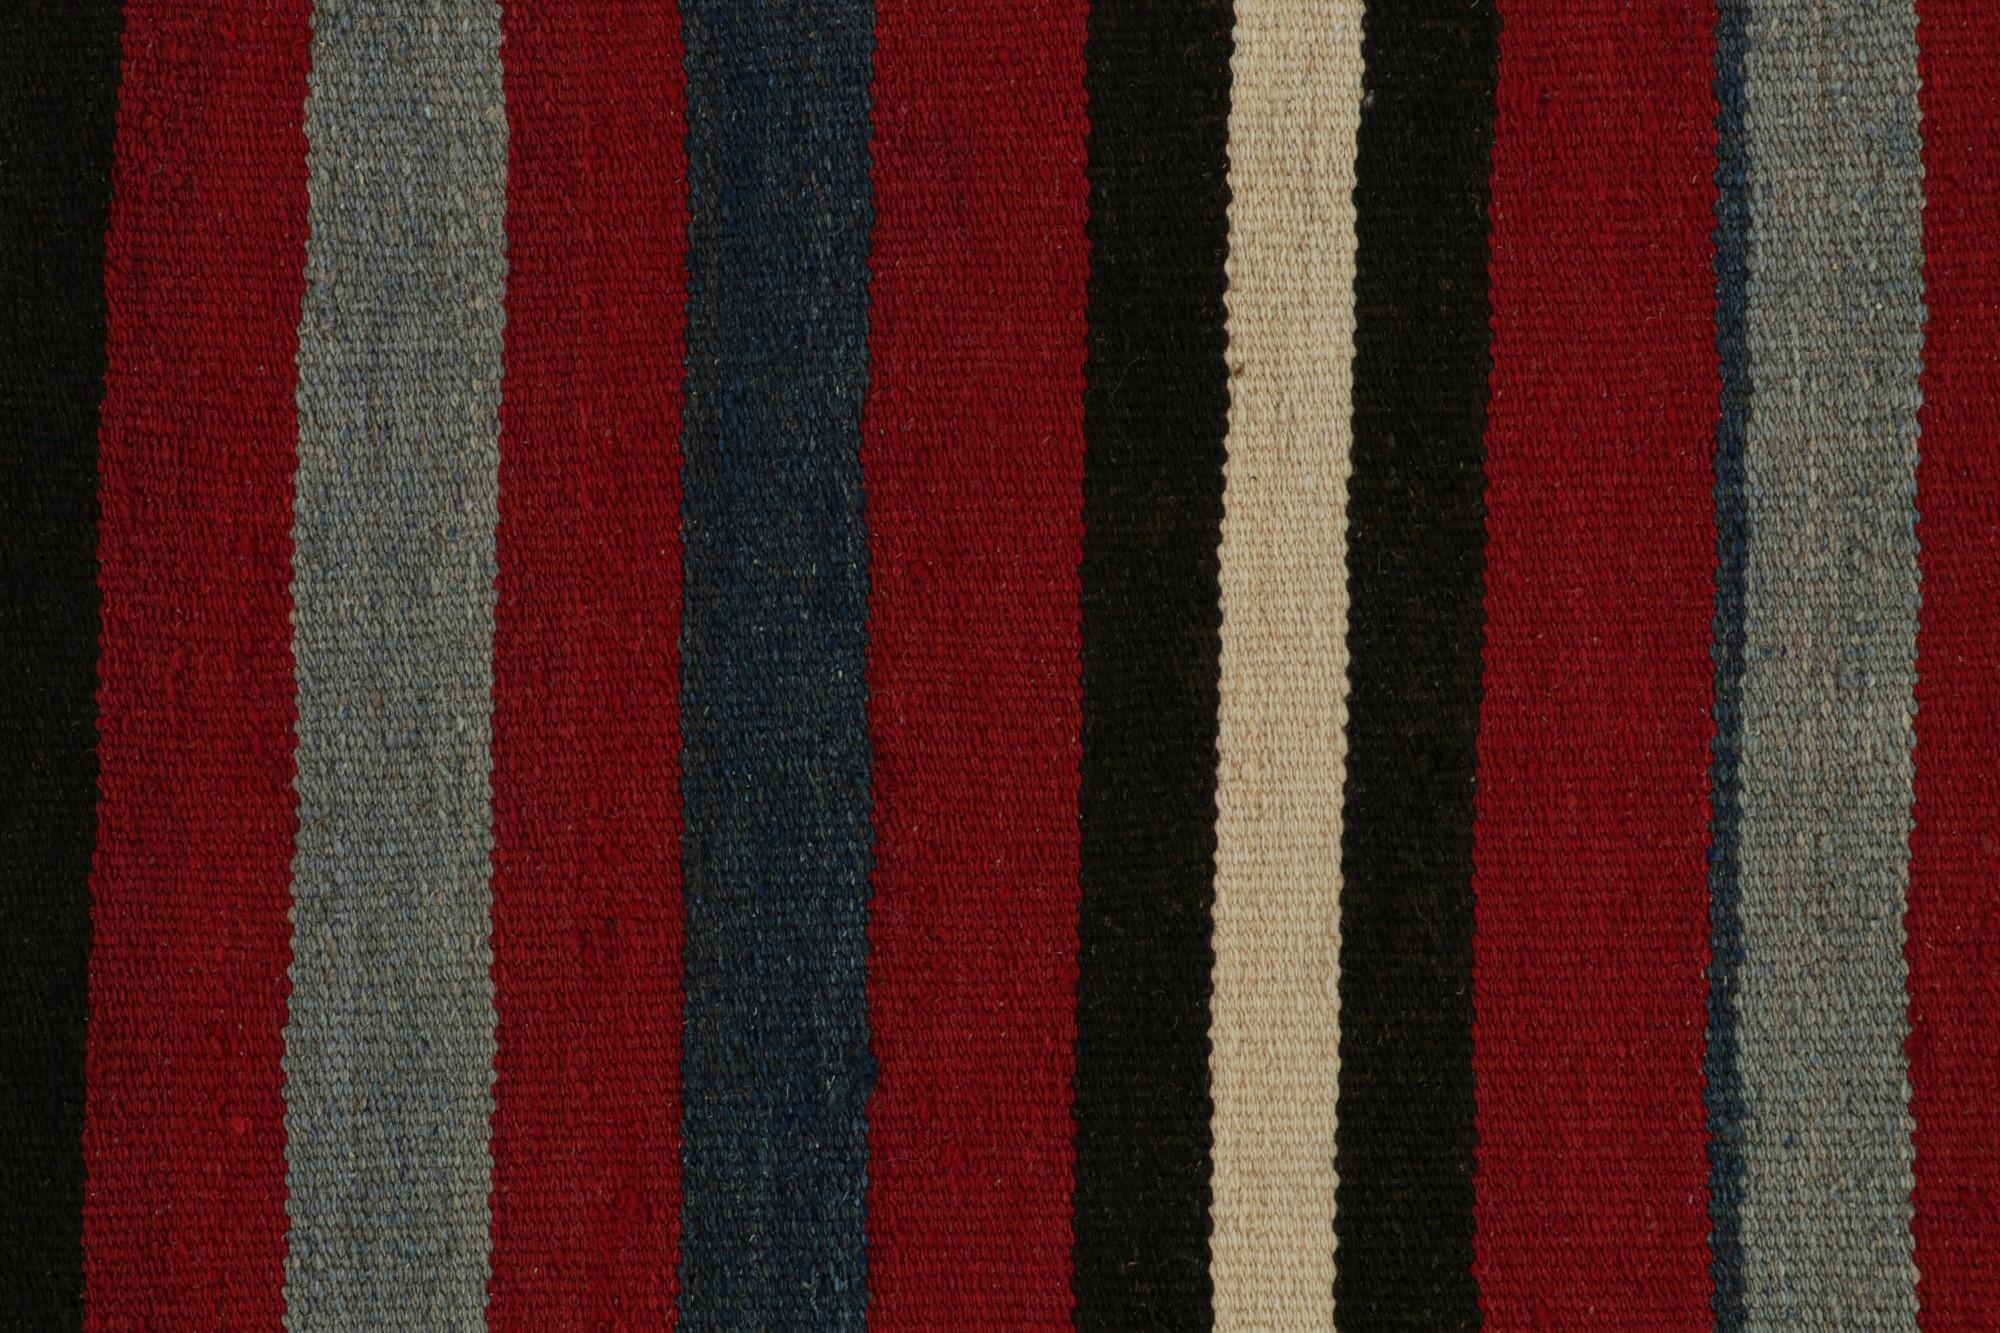 Contemporary Rug & Kilim’s Afghan Tribal Kilim Rug in Red with Geometric Striped Patterns For Sale